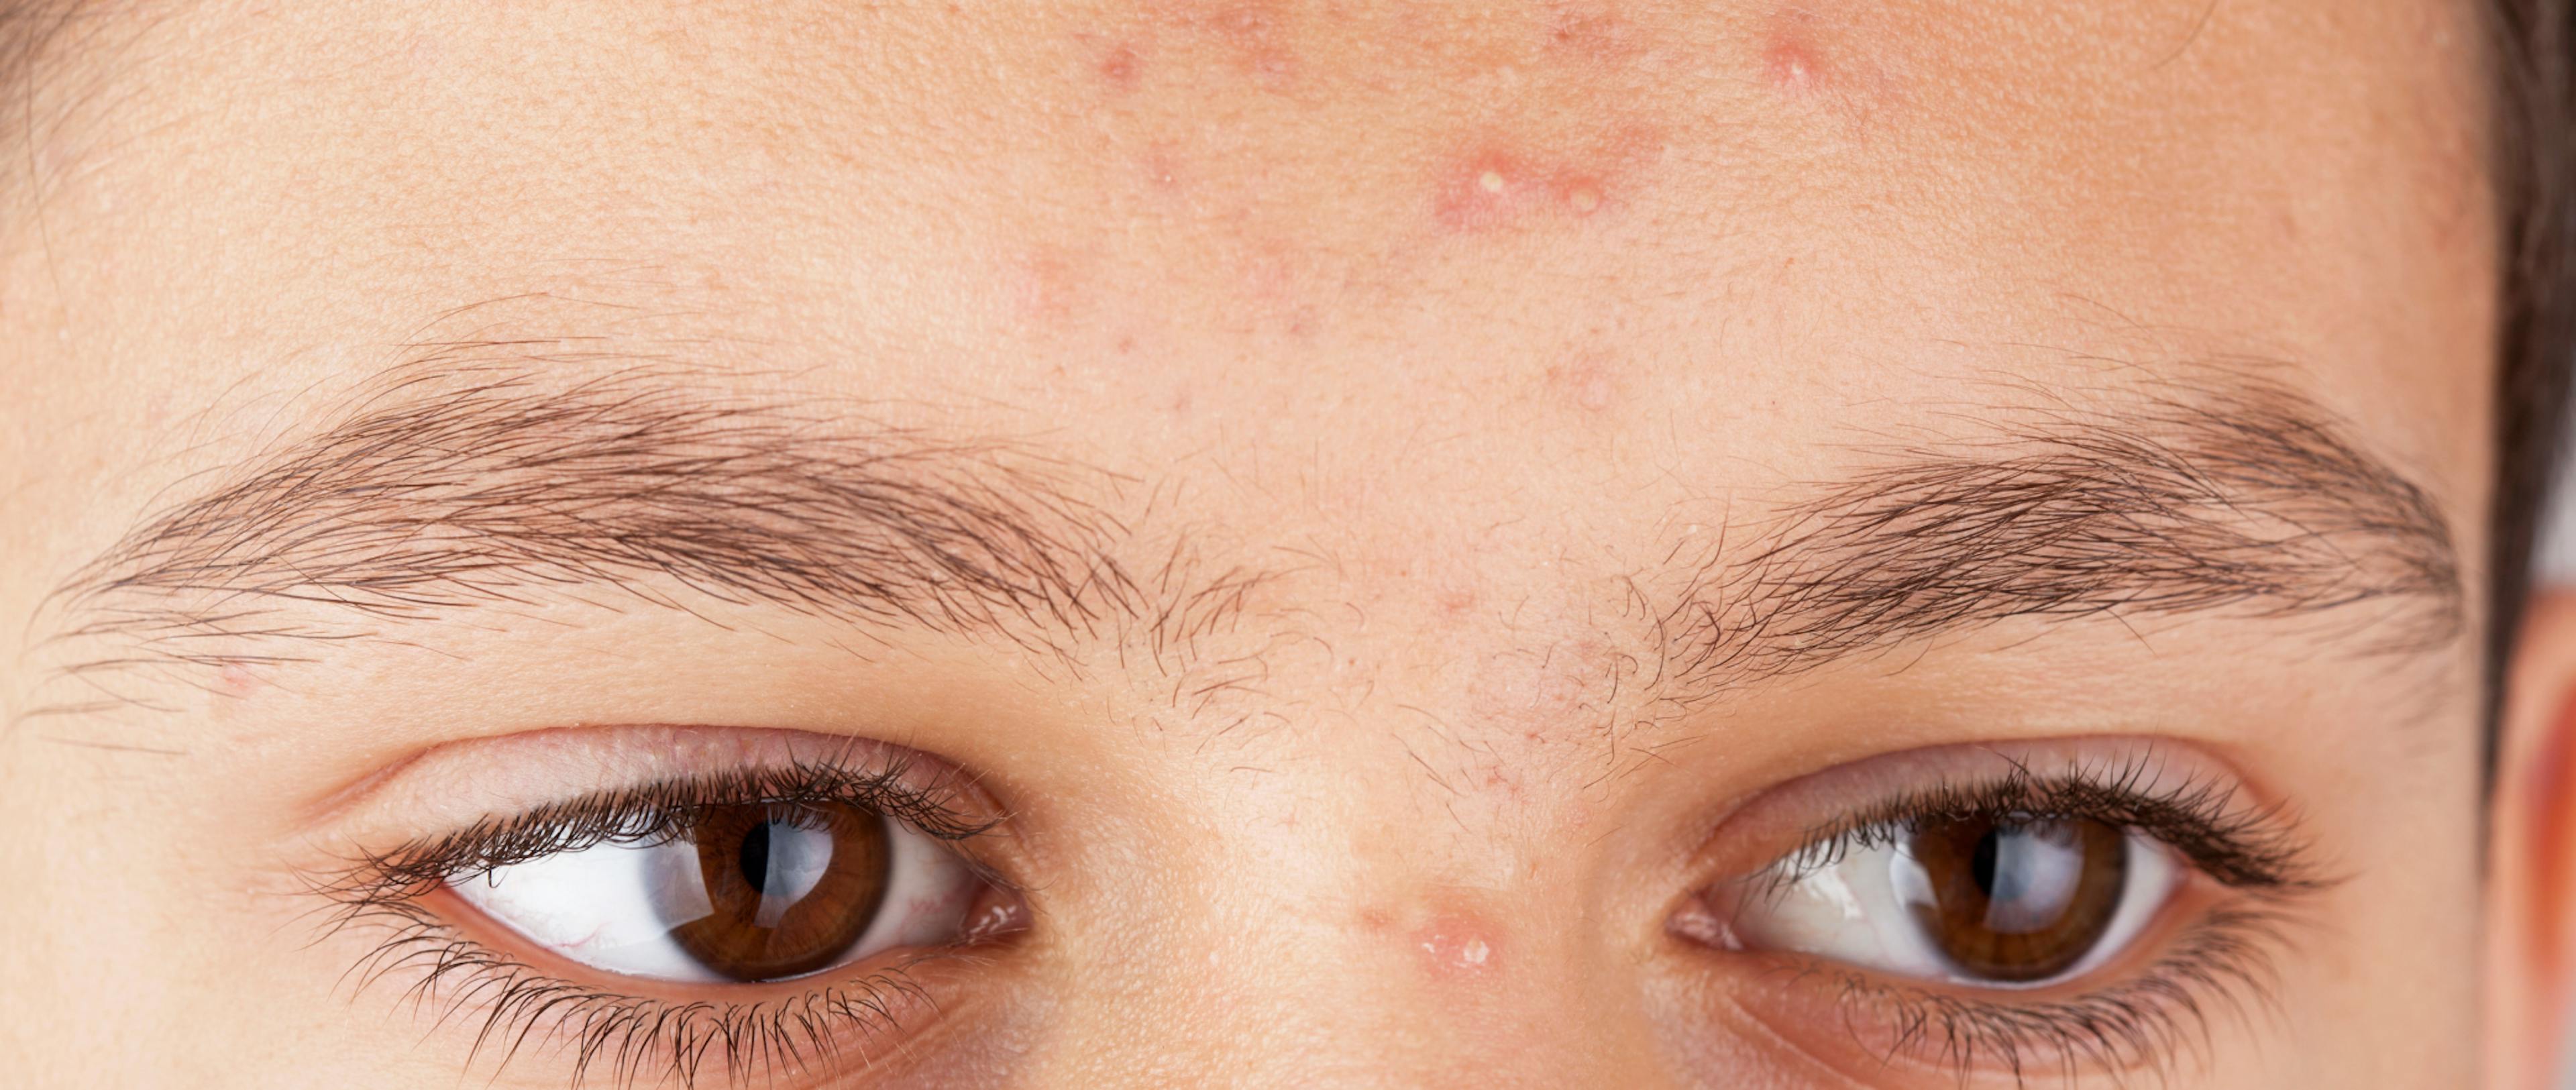 An illustration depicting an individual experiencing acne on their face.